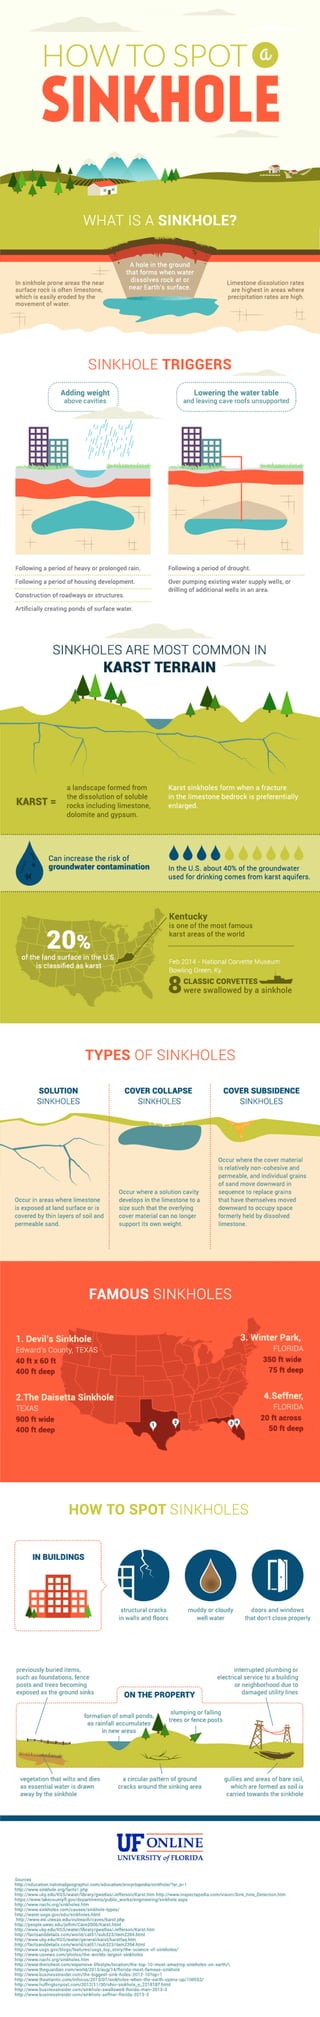 How to Spot a Sinkhole